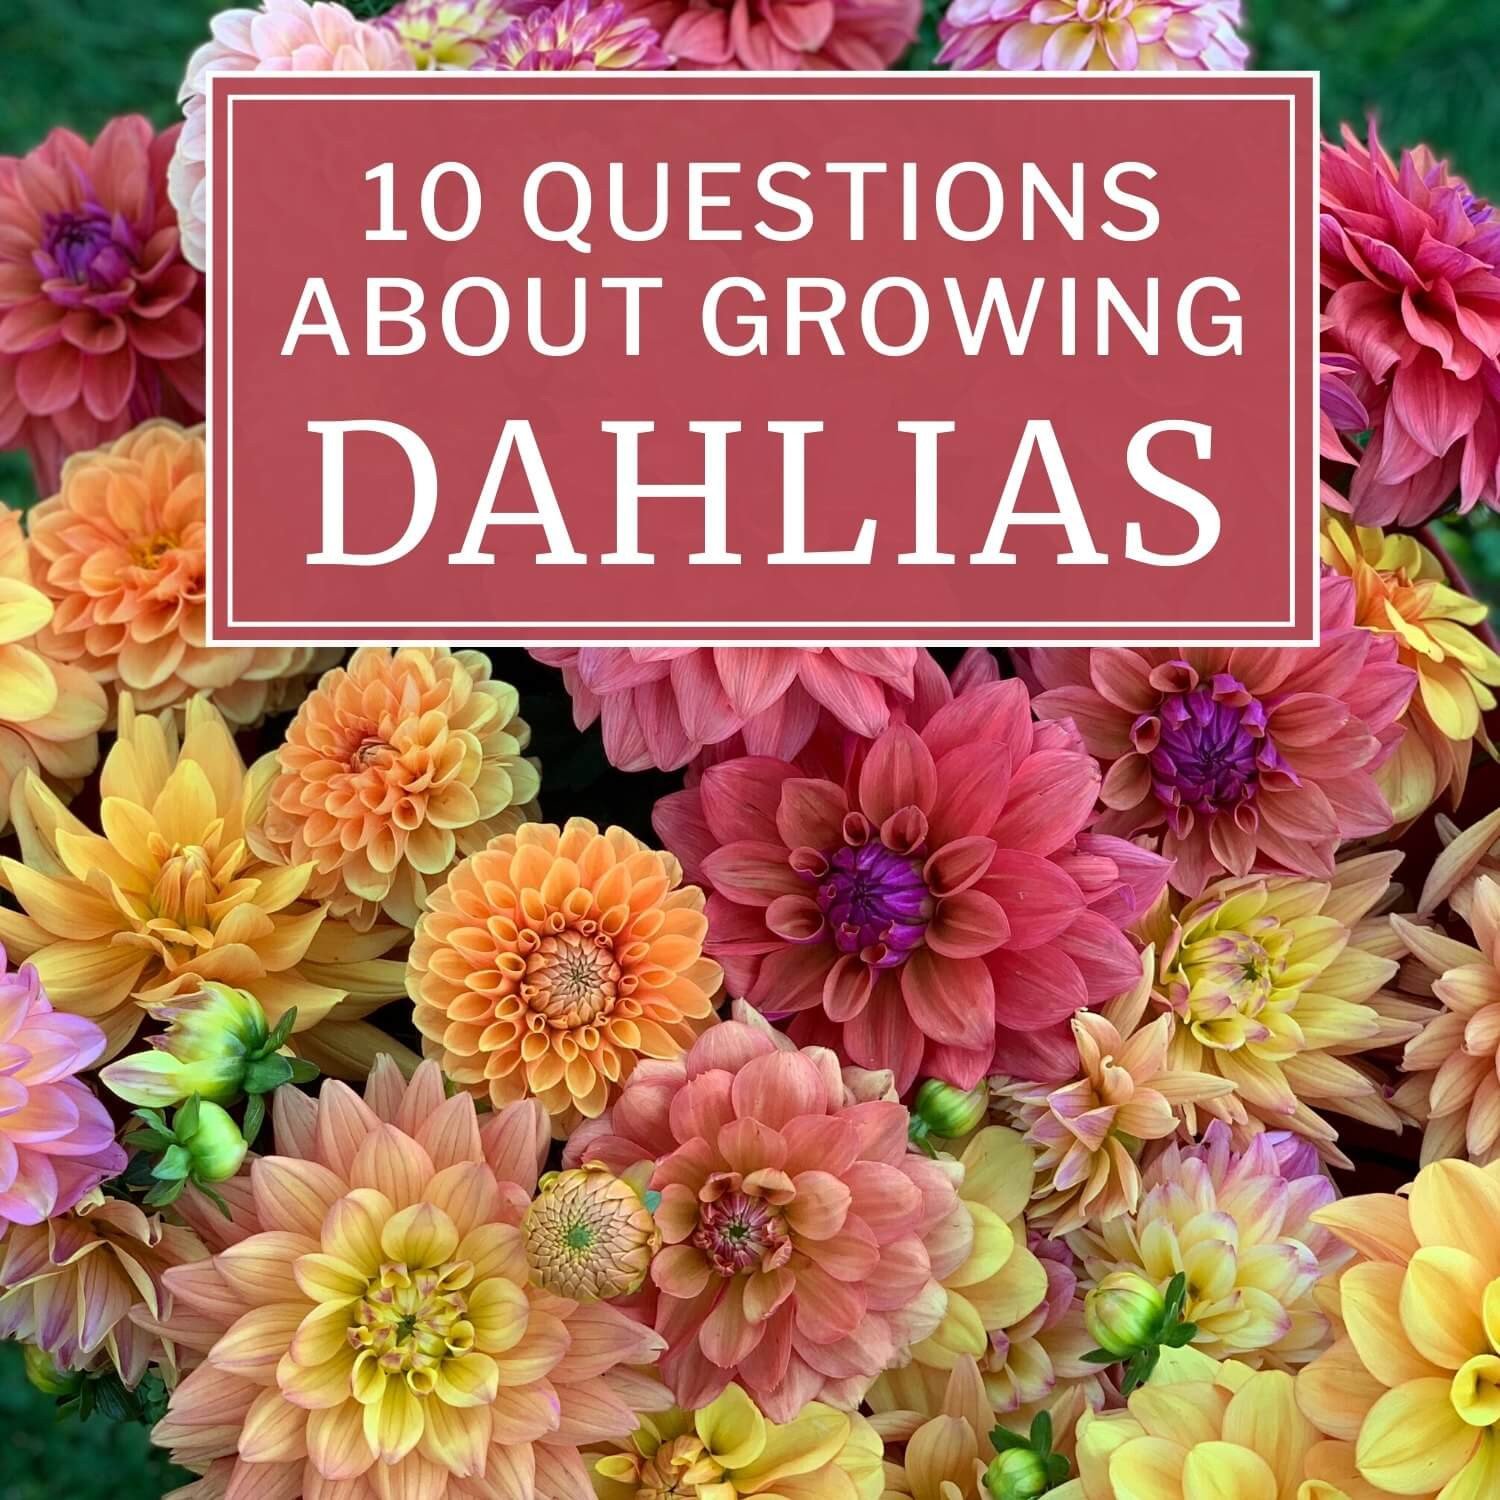 Planting Dahlias in Grow Bags & Taking Risks